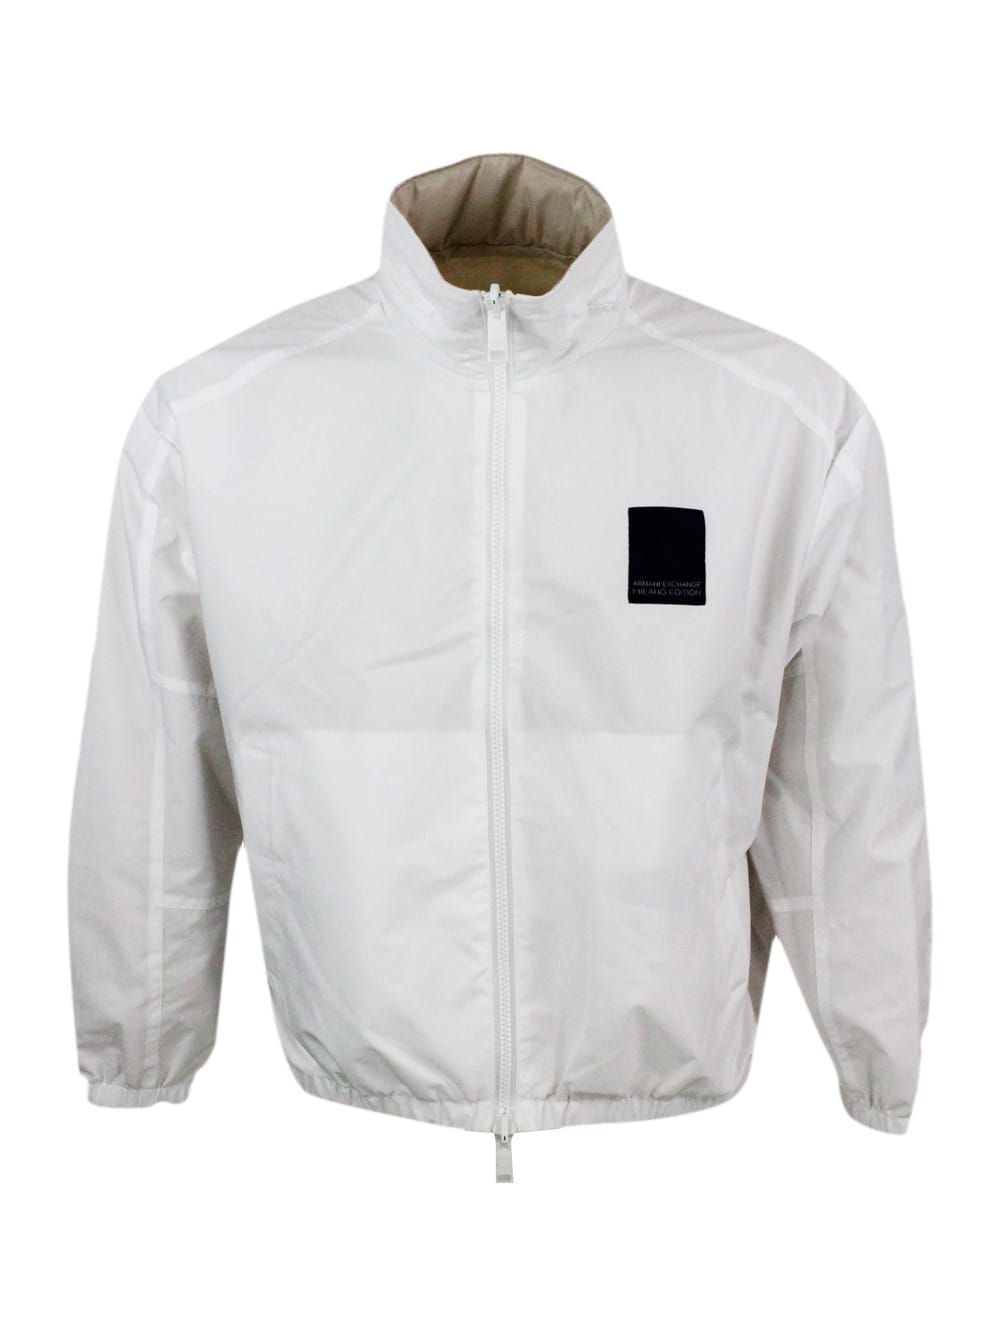 Armani Collezioni Reversible Windproof Jacket In Light Technical Fabric, Milano Edition Line, Zip Closure And Conceale In White